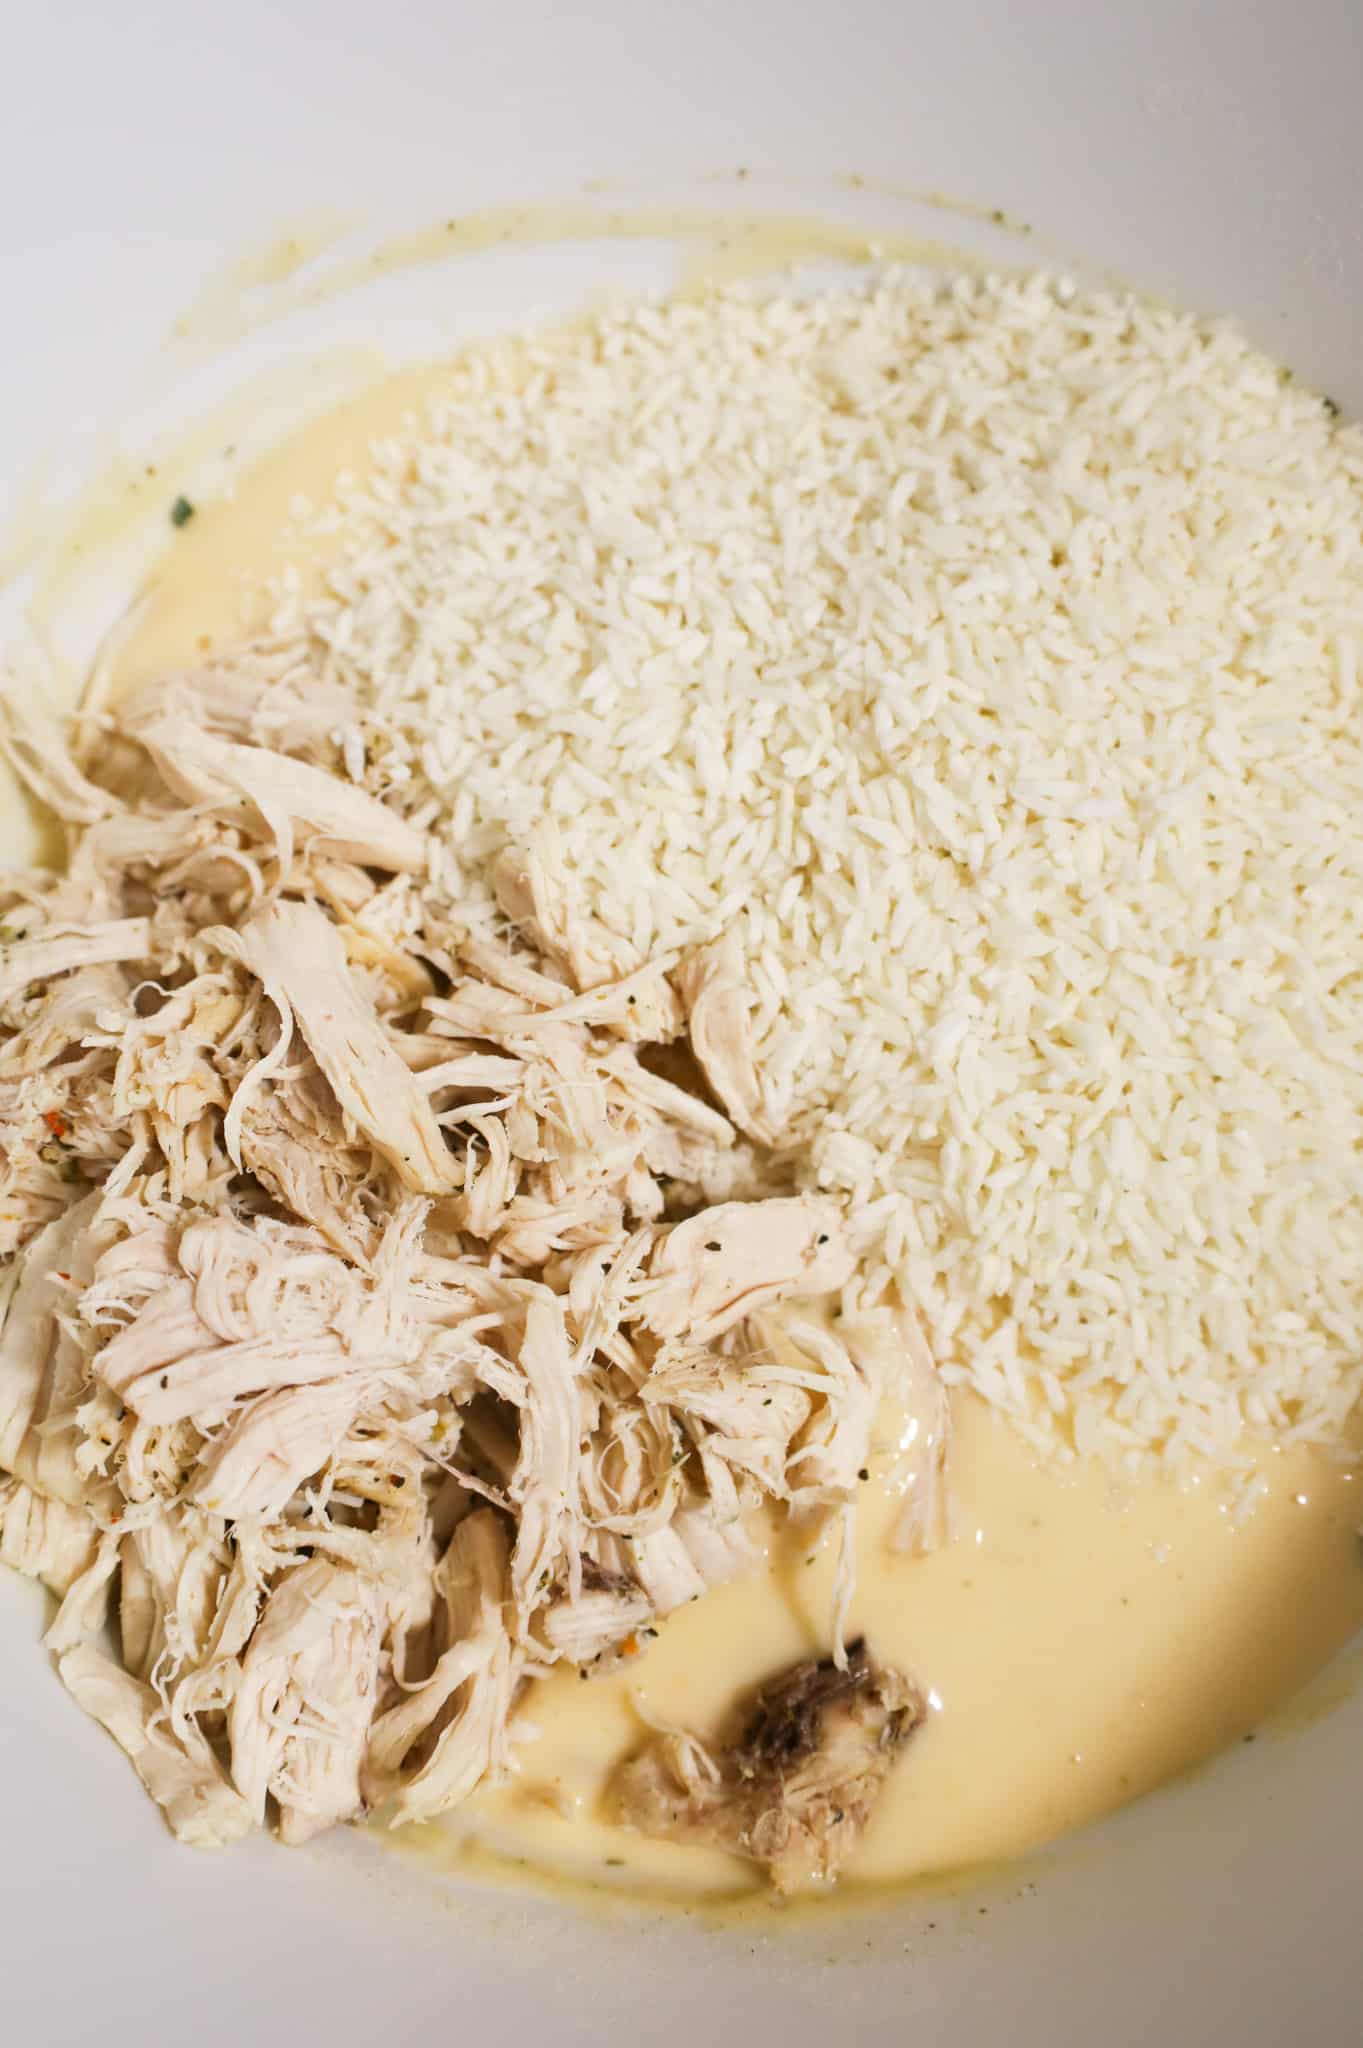 shredded chicken and instant rice on top of cream soup mixture in a mixing bowl